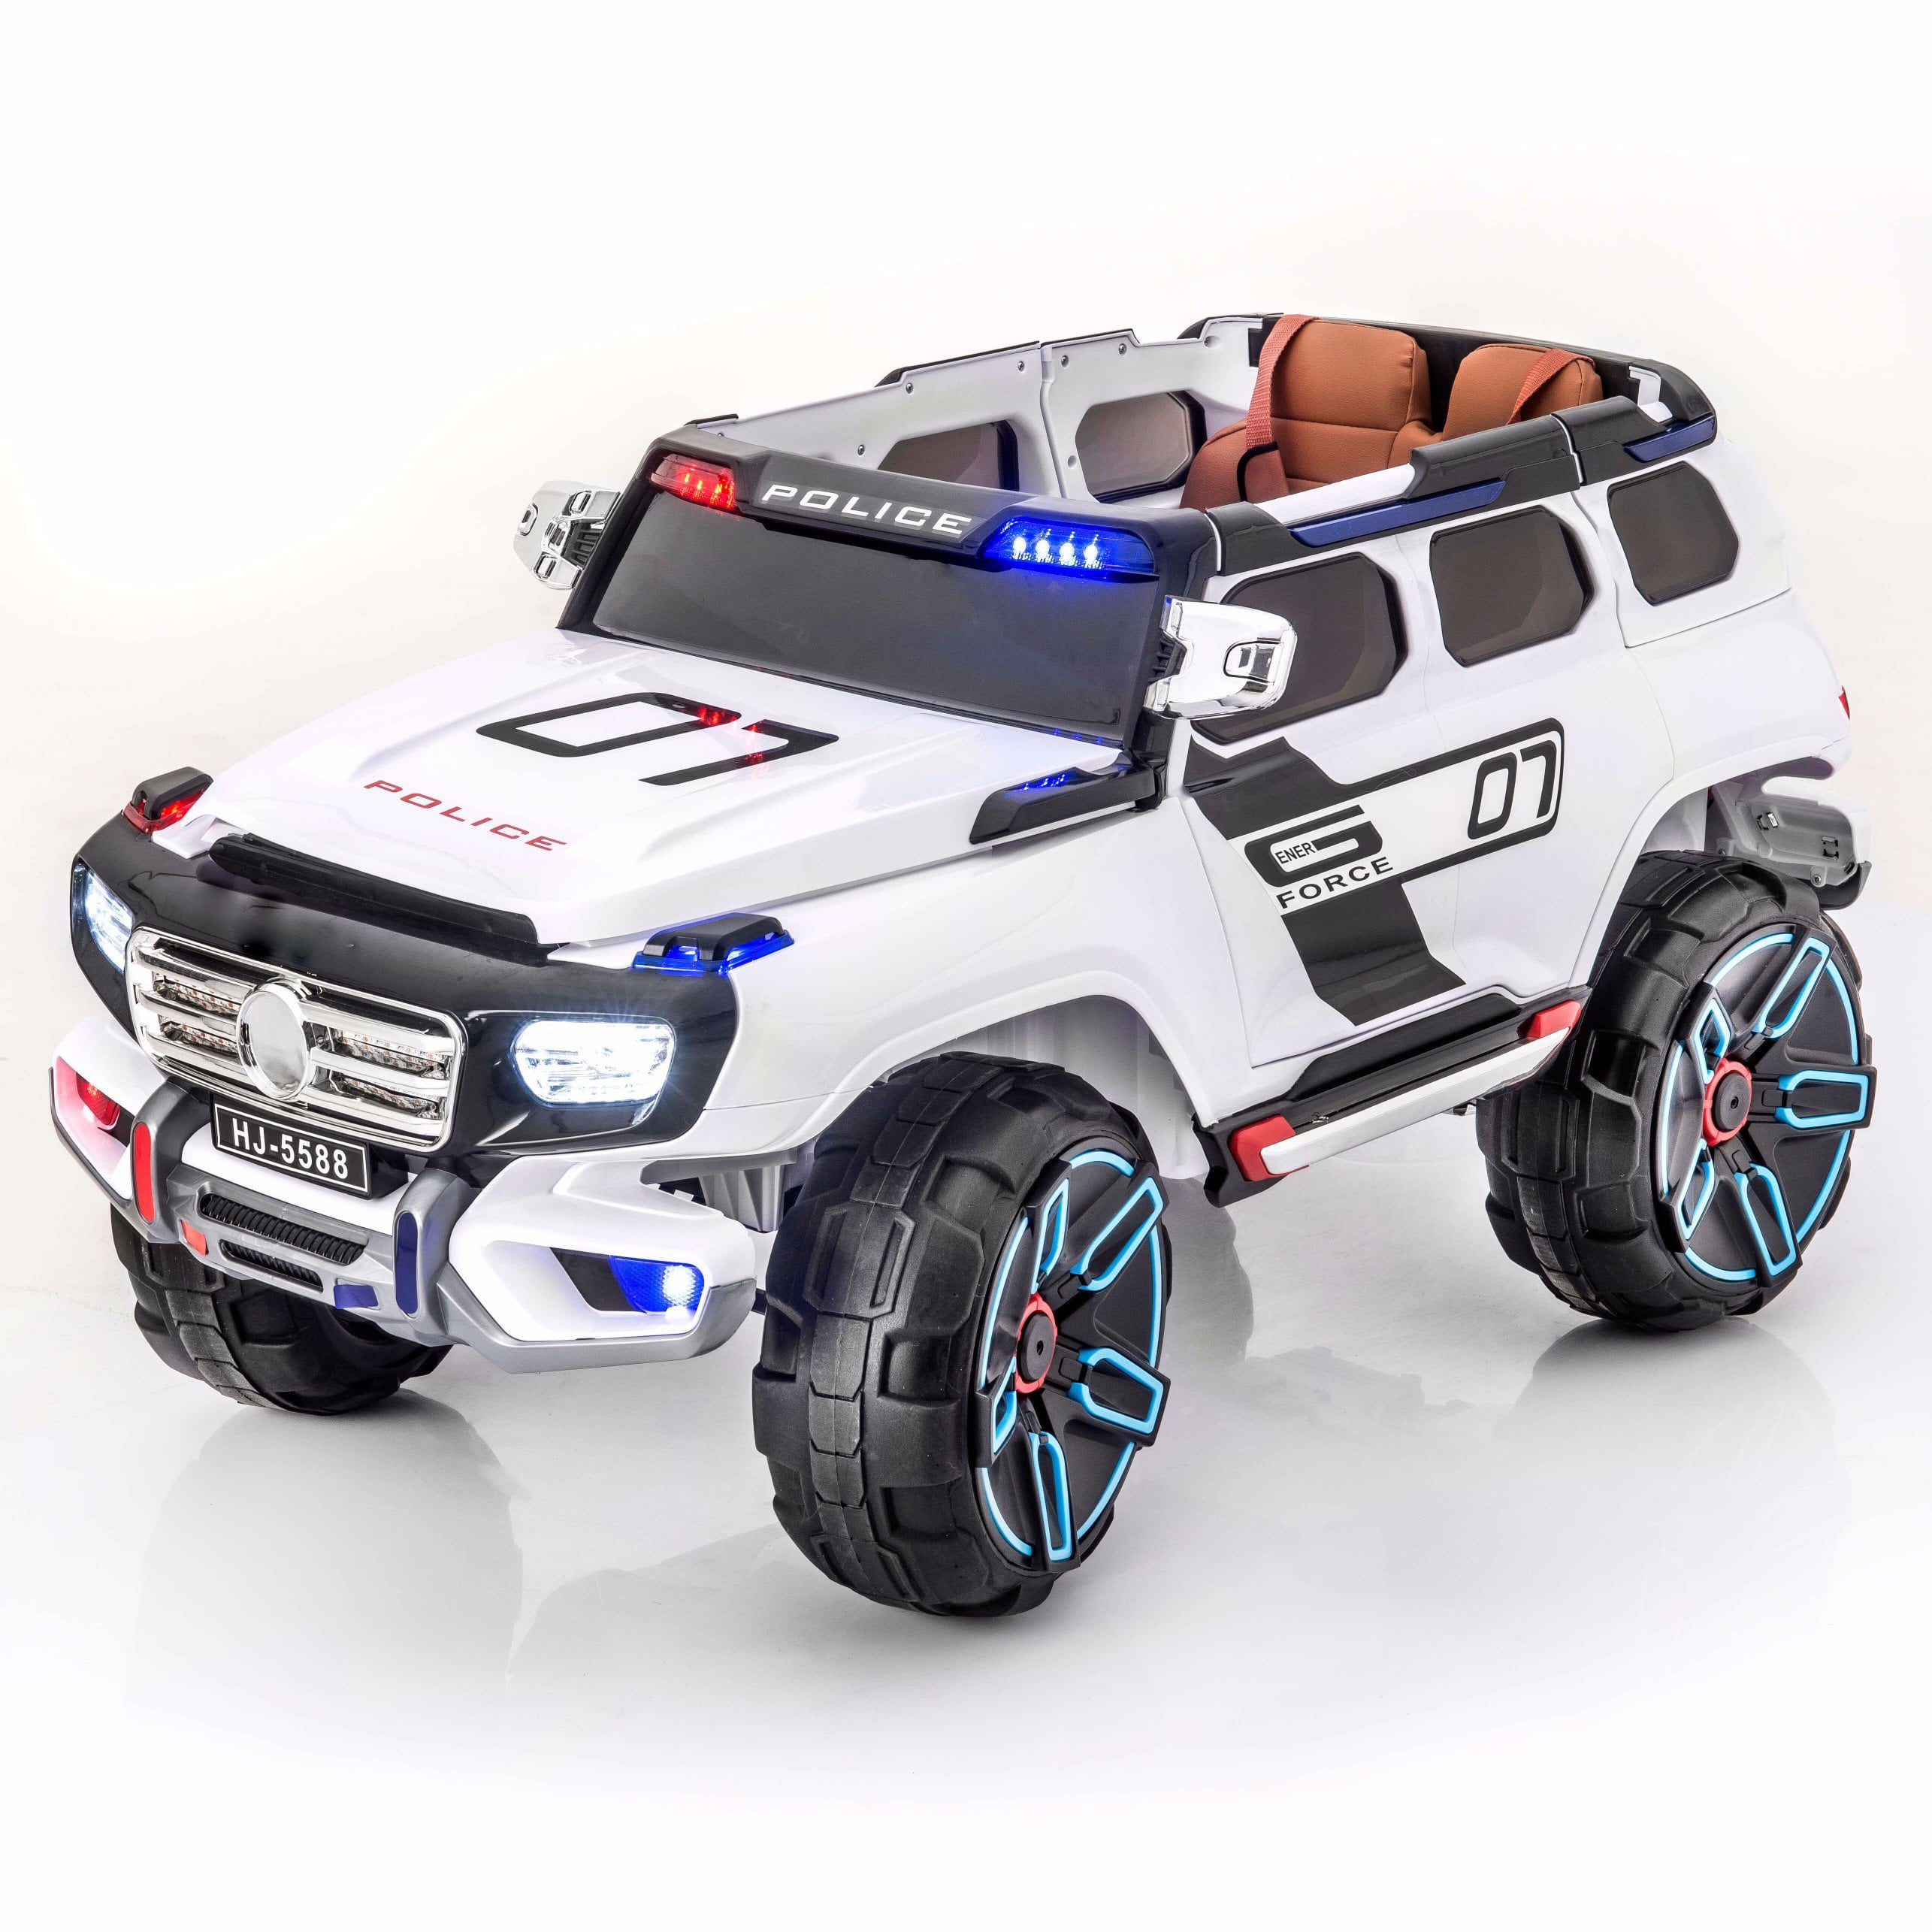 Premium Police Edition 12V Battery Powered Ride On Electric Toy Car For